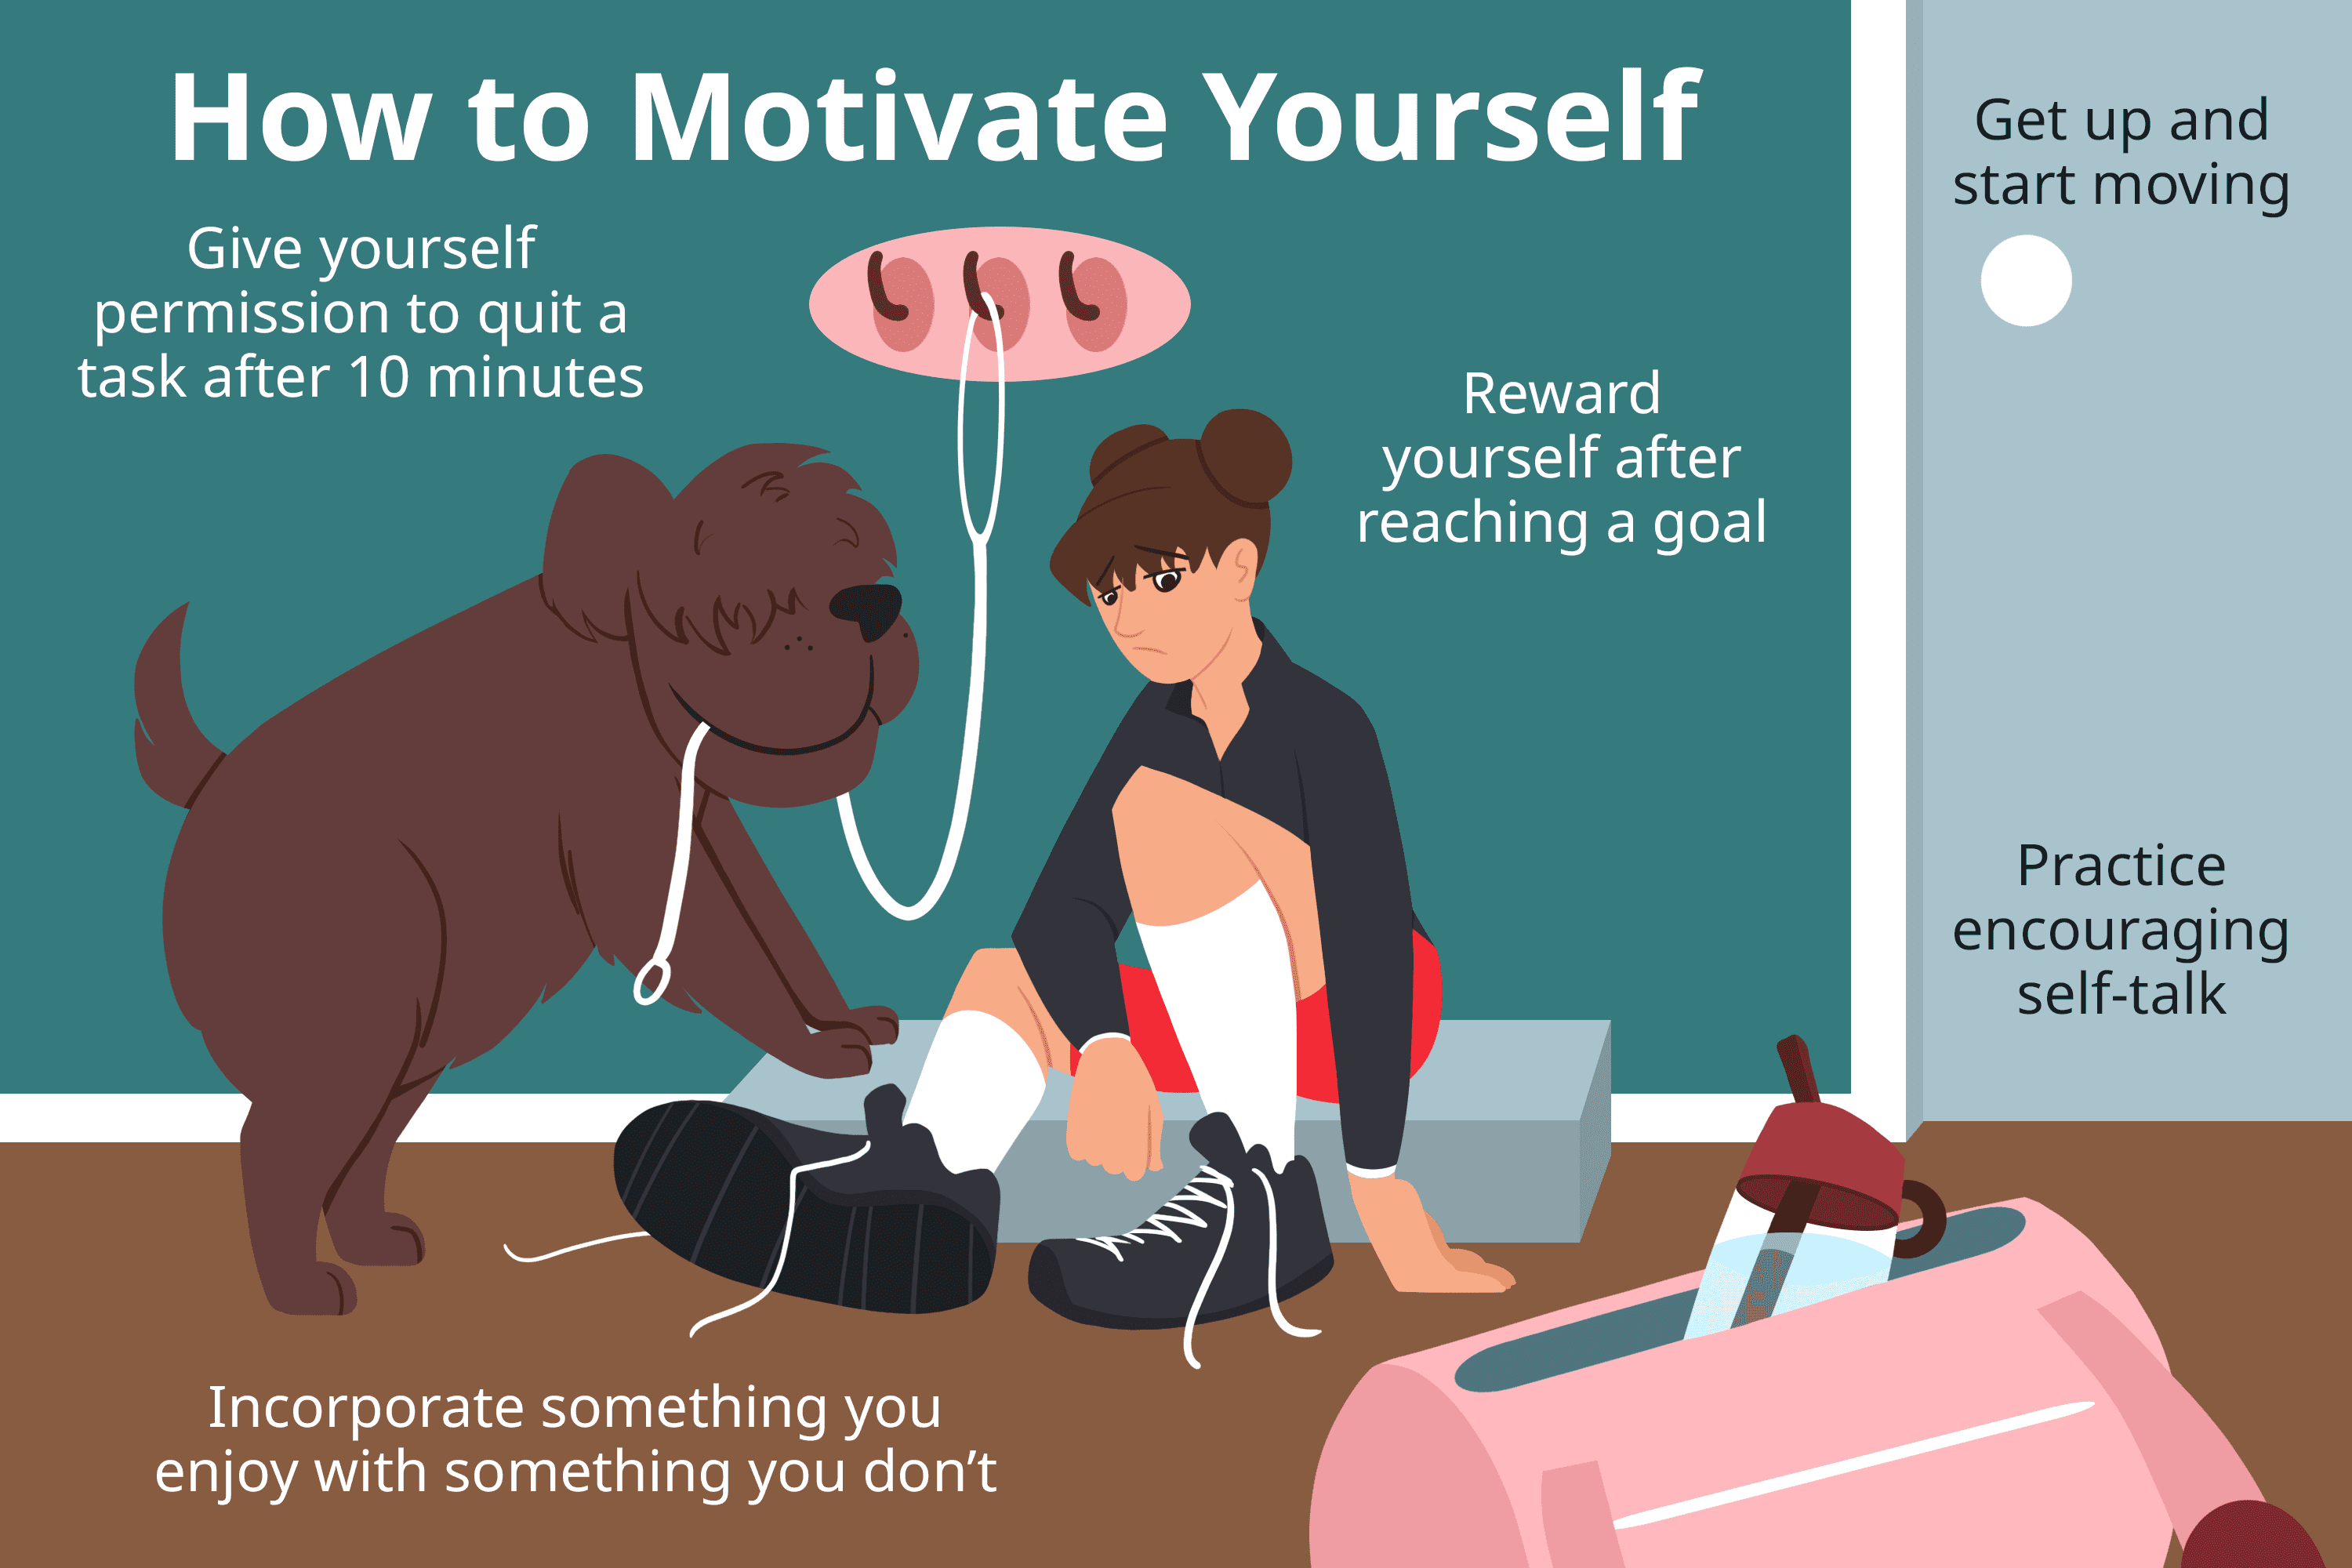 5 Ways to Your Motivation When Feeling Depressed